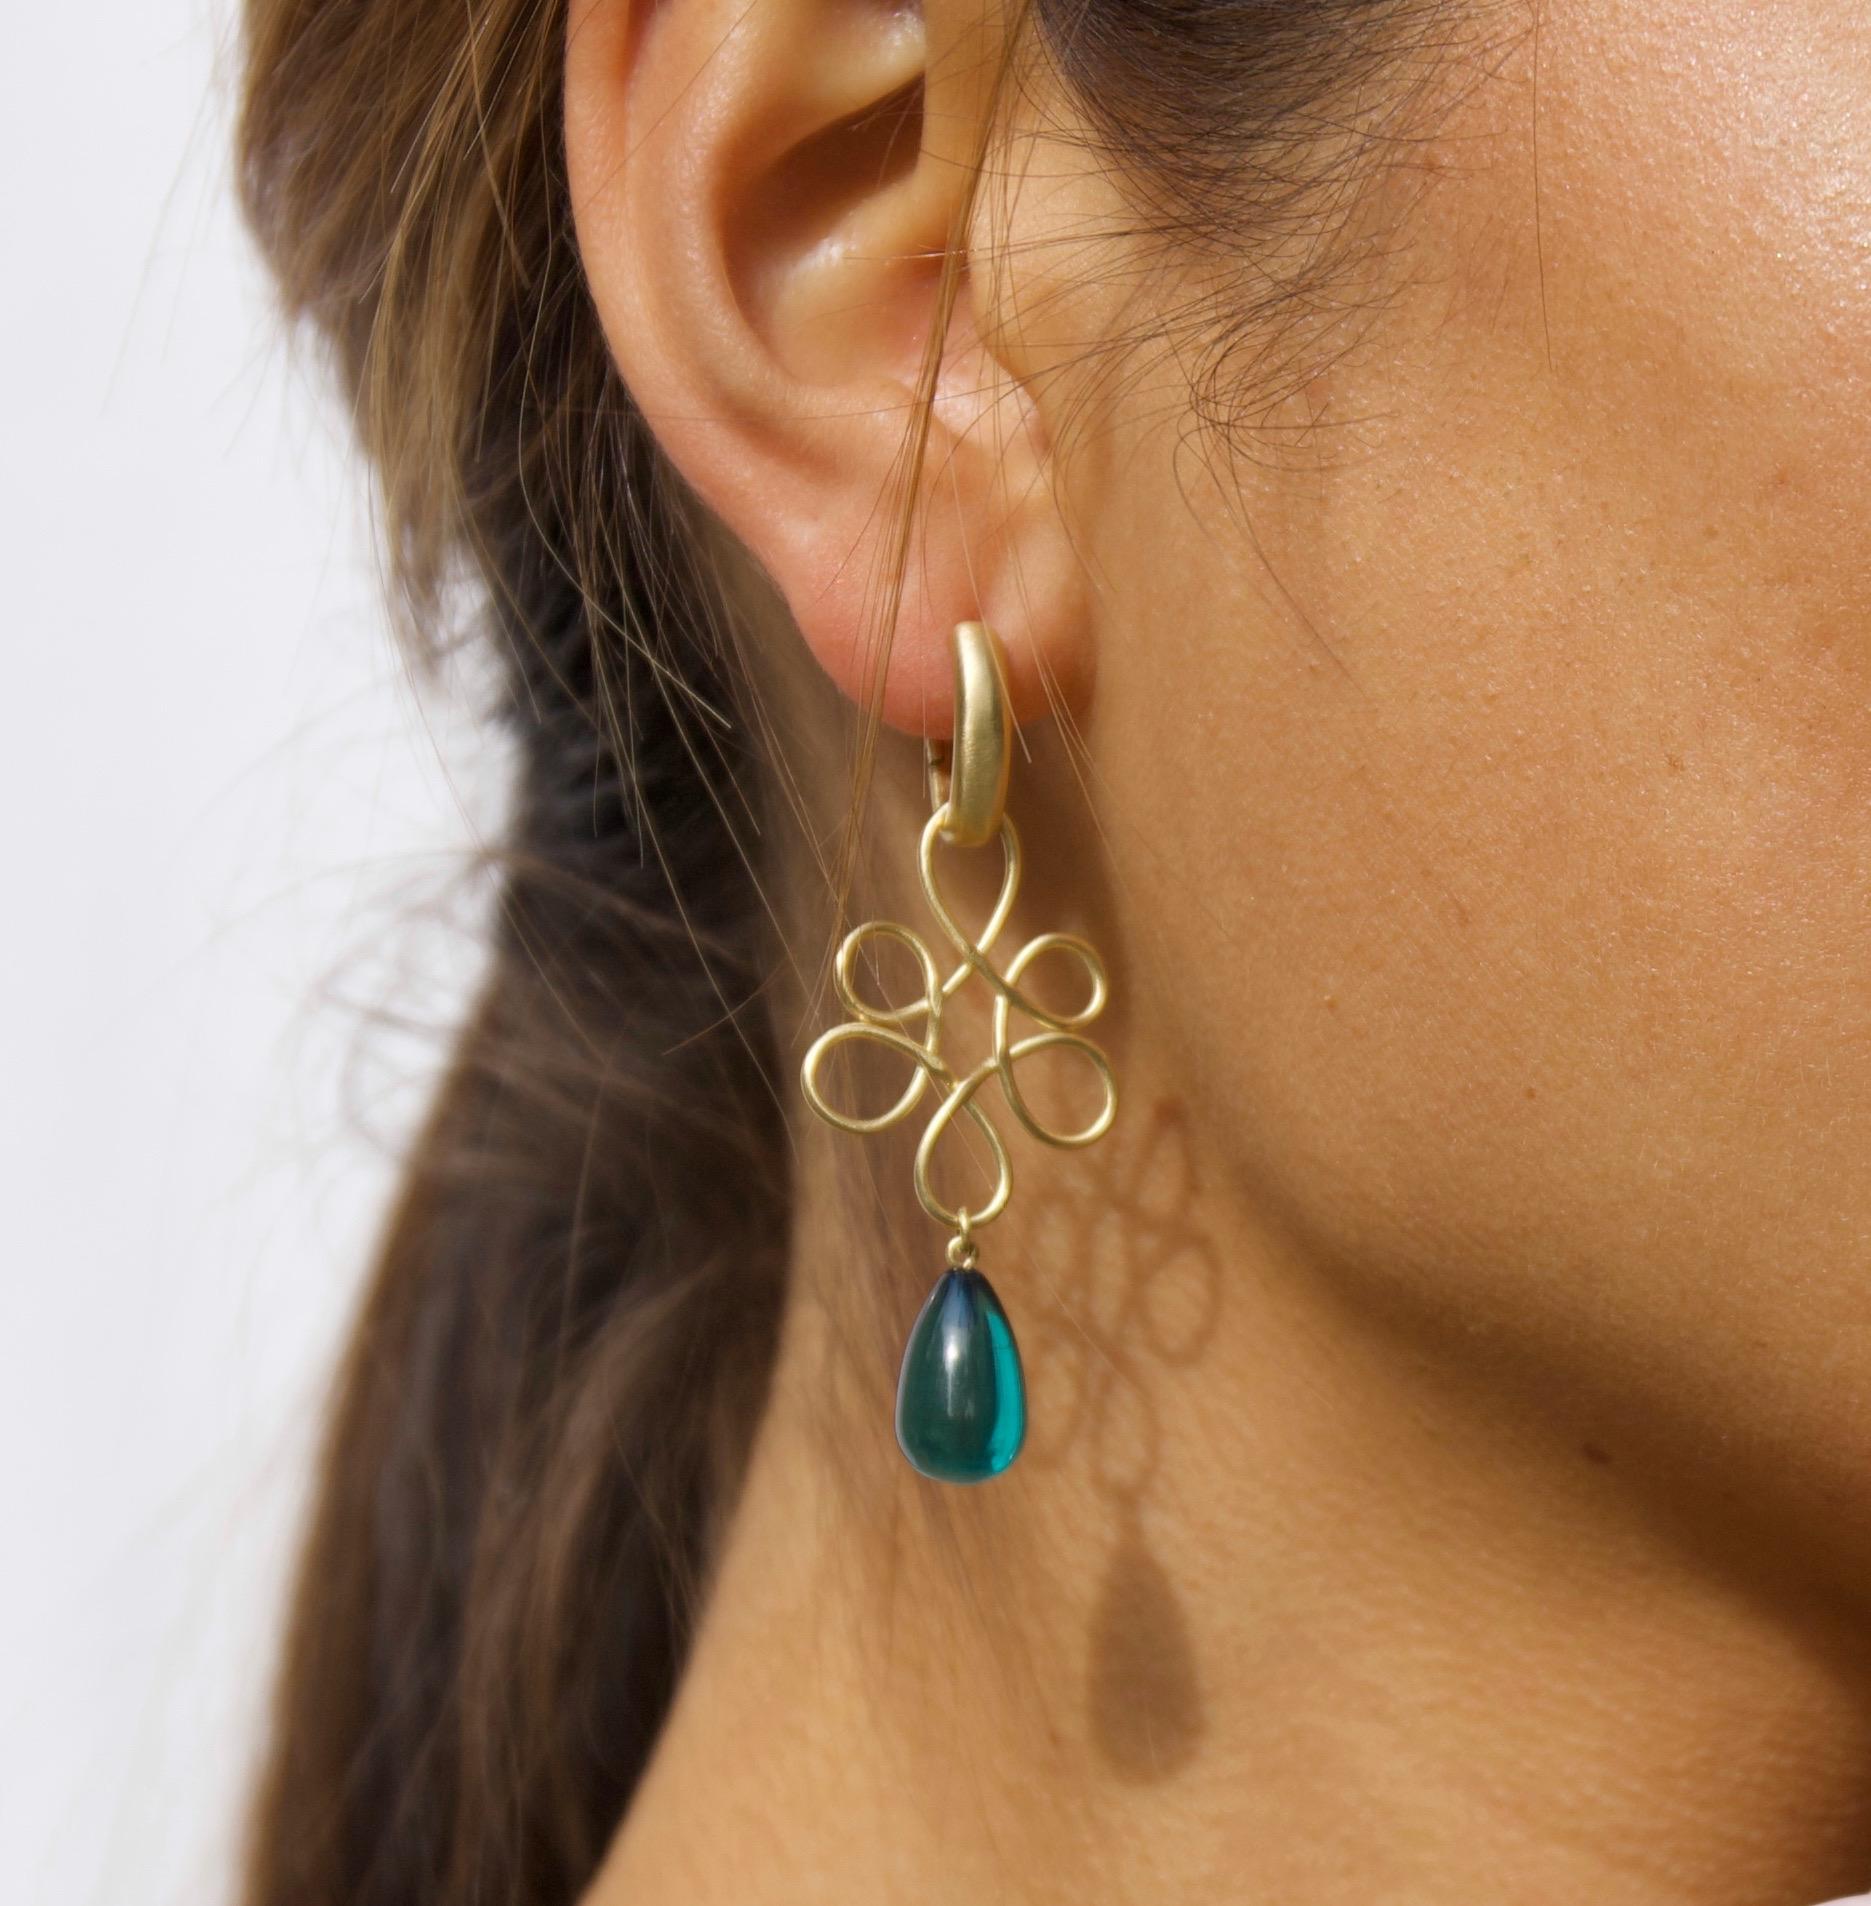 These handmade 18K Gold V-shaped hoop earrings and blue amber drops on 18K gold wire make a great addition to your jewelry collection. The lightweight teal amber drops add just the amount of colour that you need sometimes without taking over. The